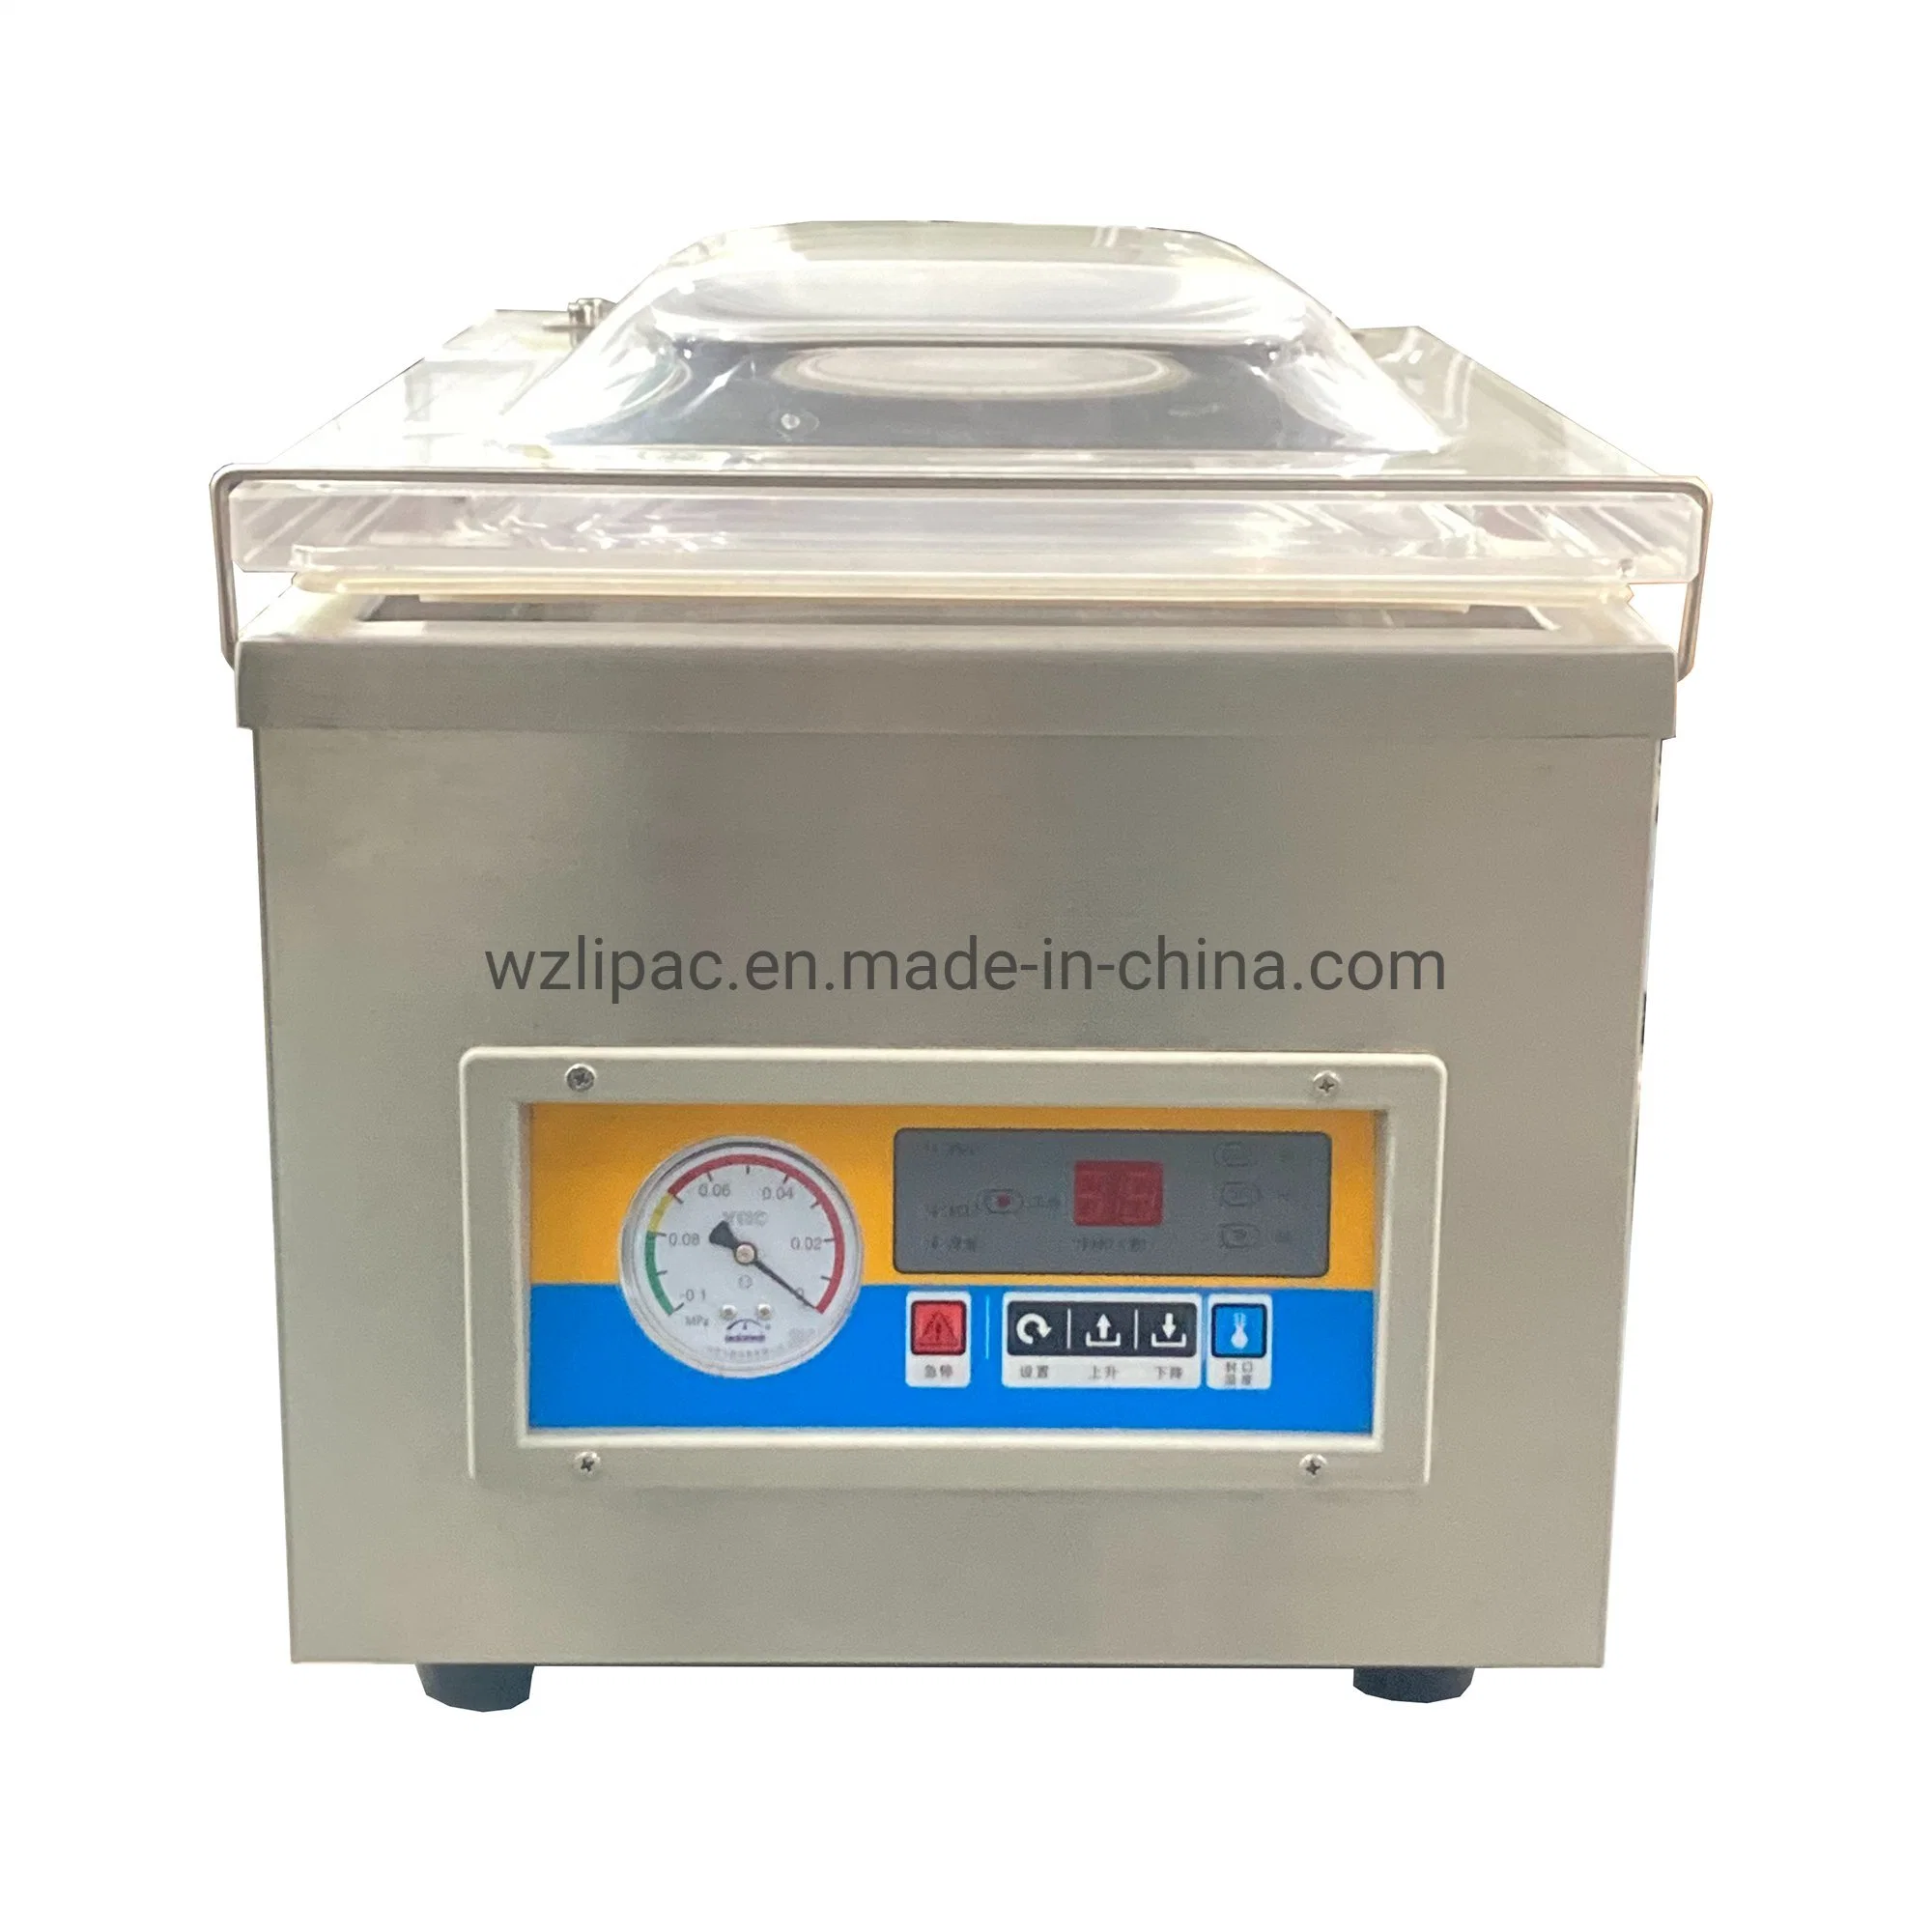 Packaging Machine Good Quality Promotional New Custom Packaging Machine